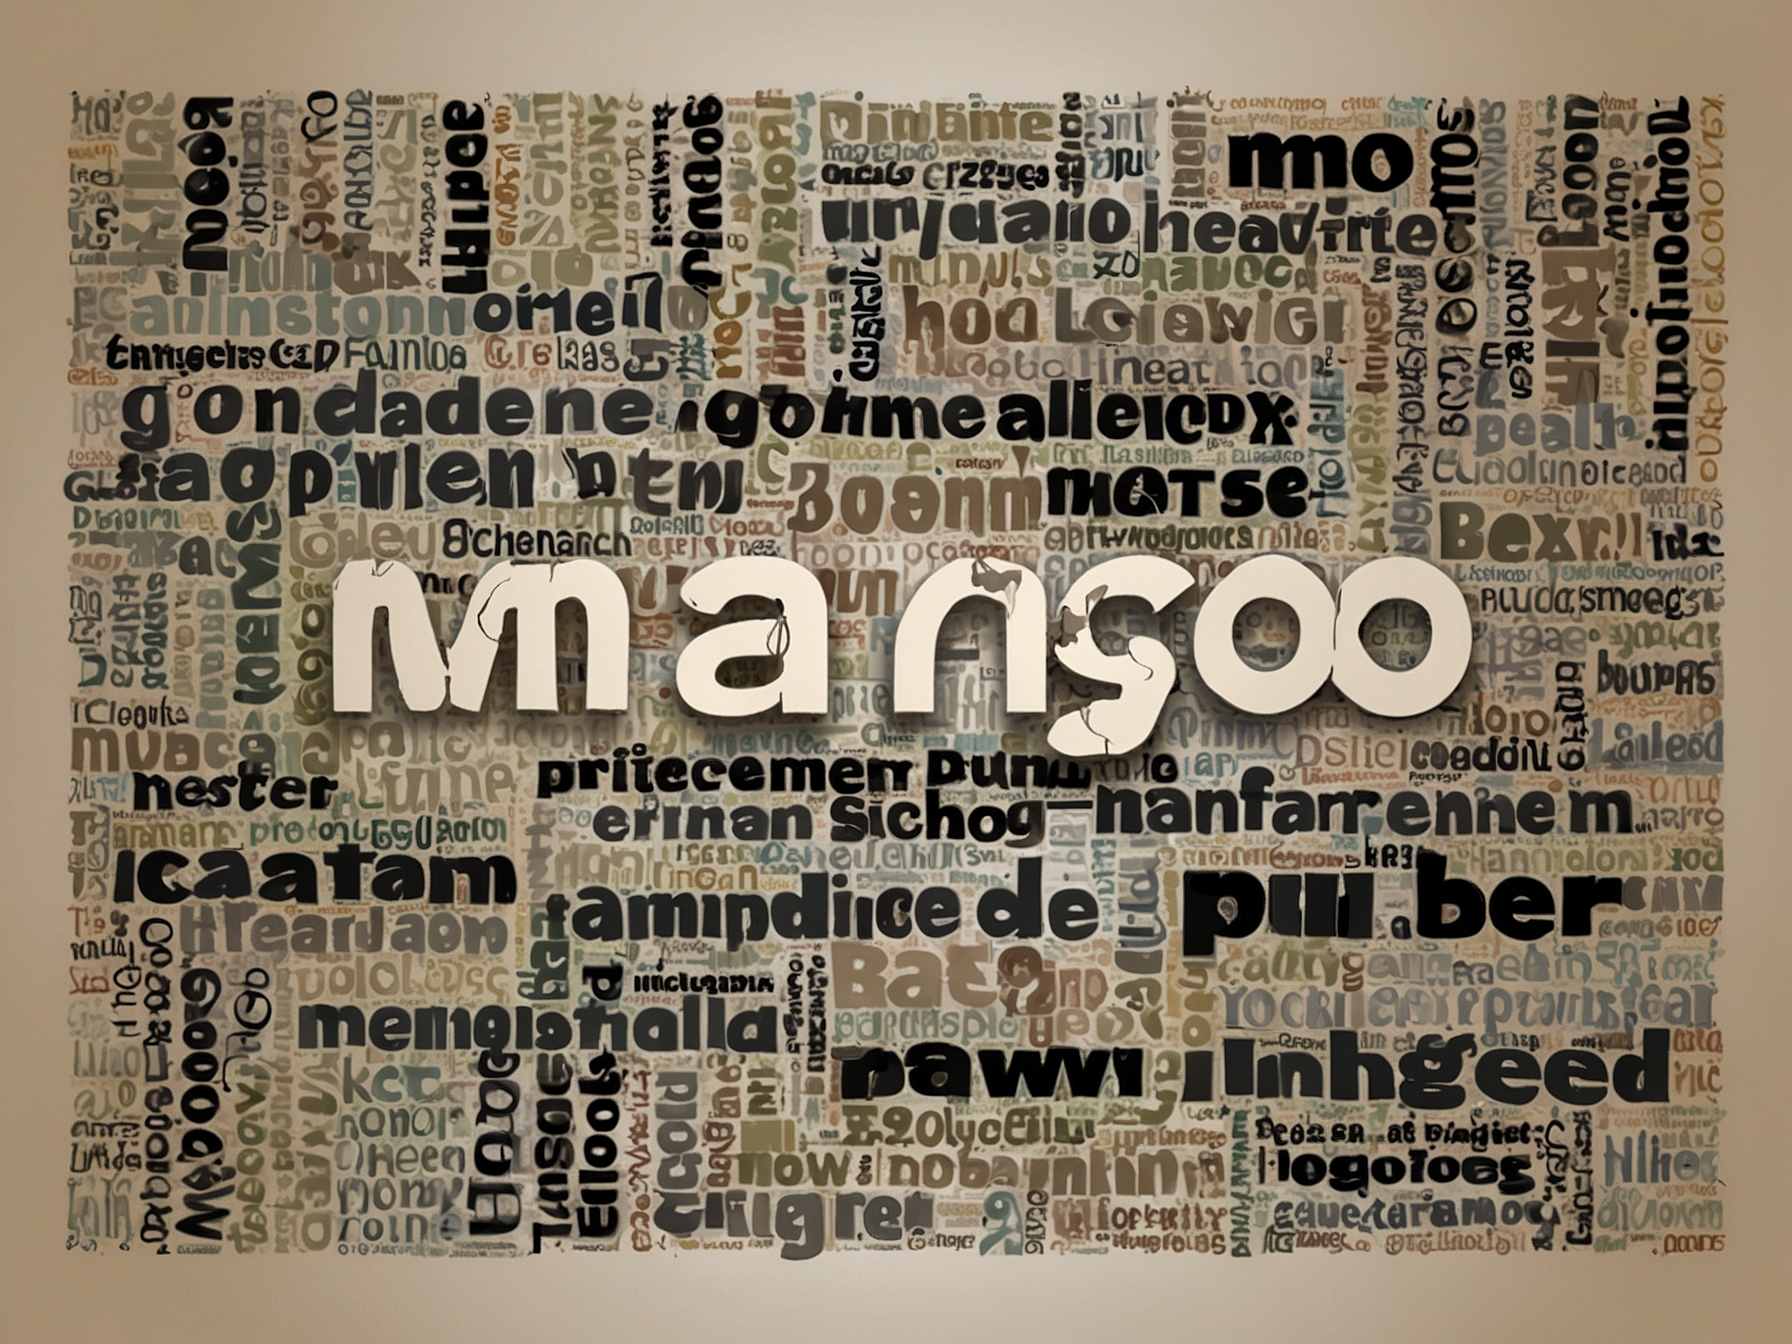 A close-up of a Wordle grid with the word 'MANGO' revealed, highlighting the correct placement of letters and the sense of achievement in solving the puzzle.